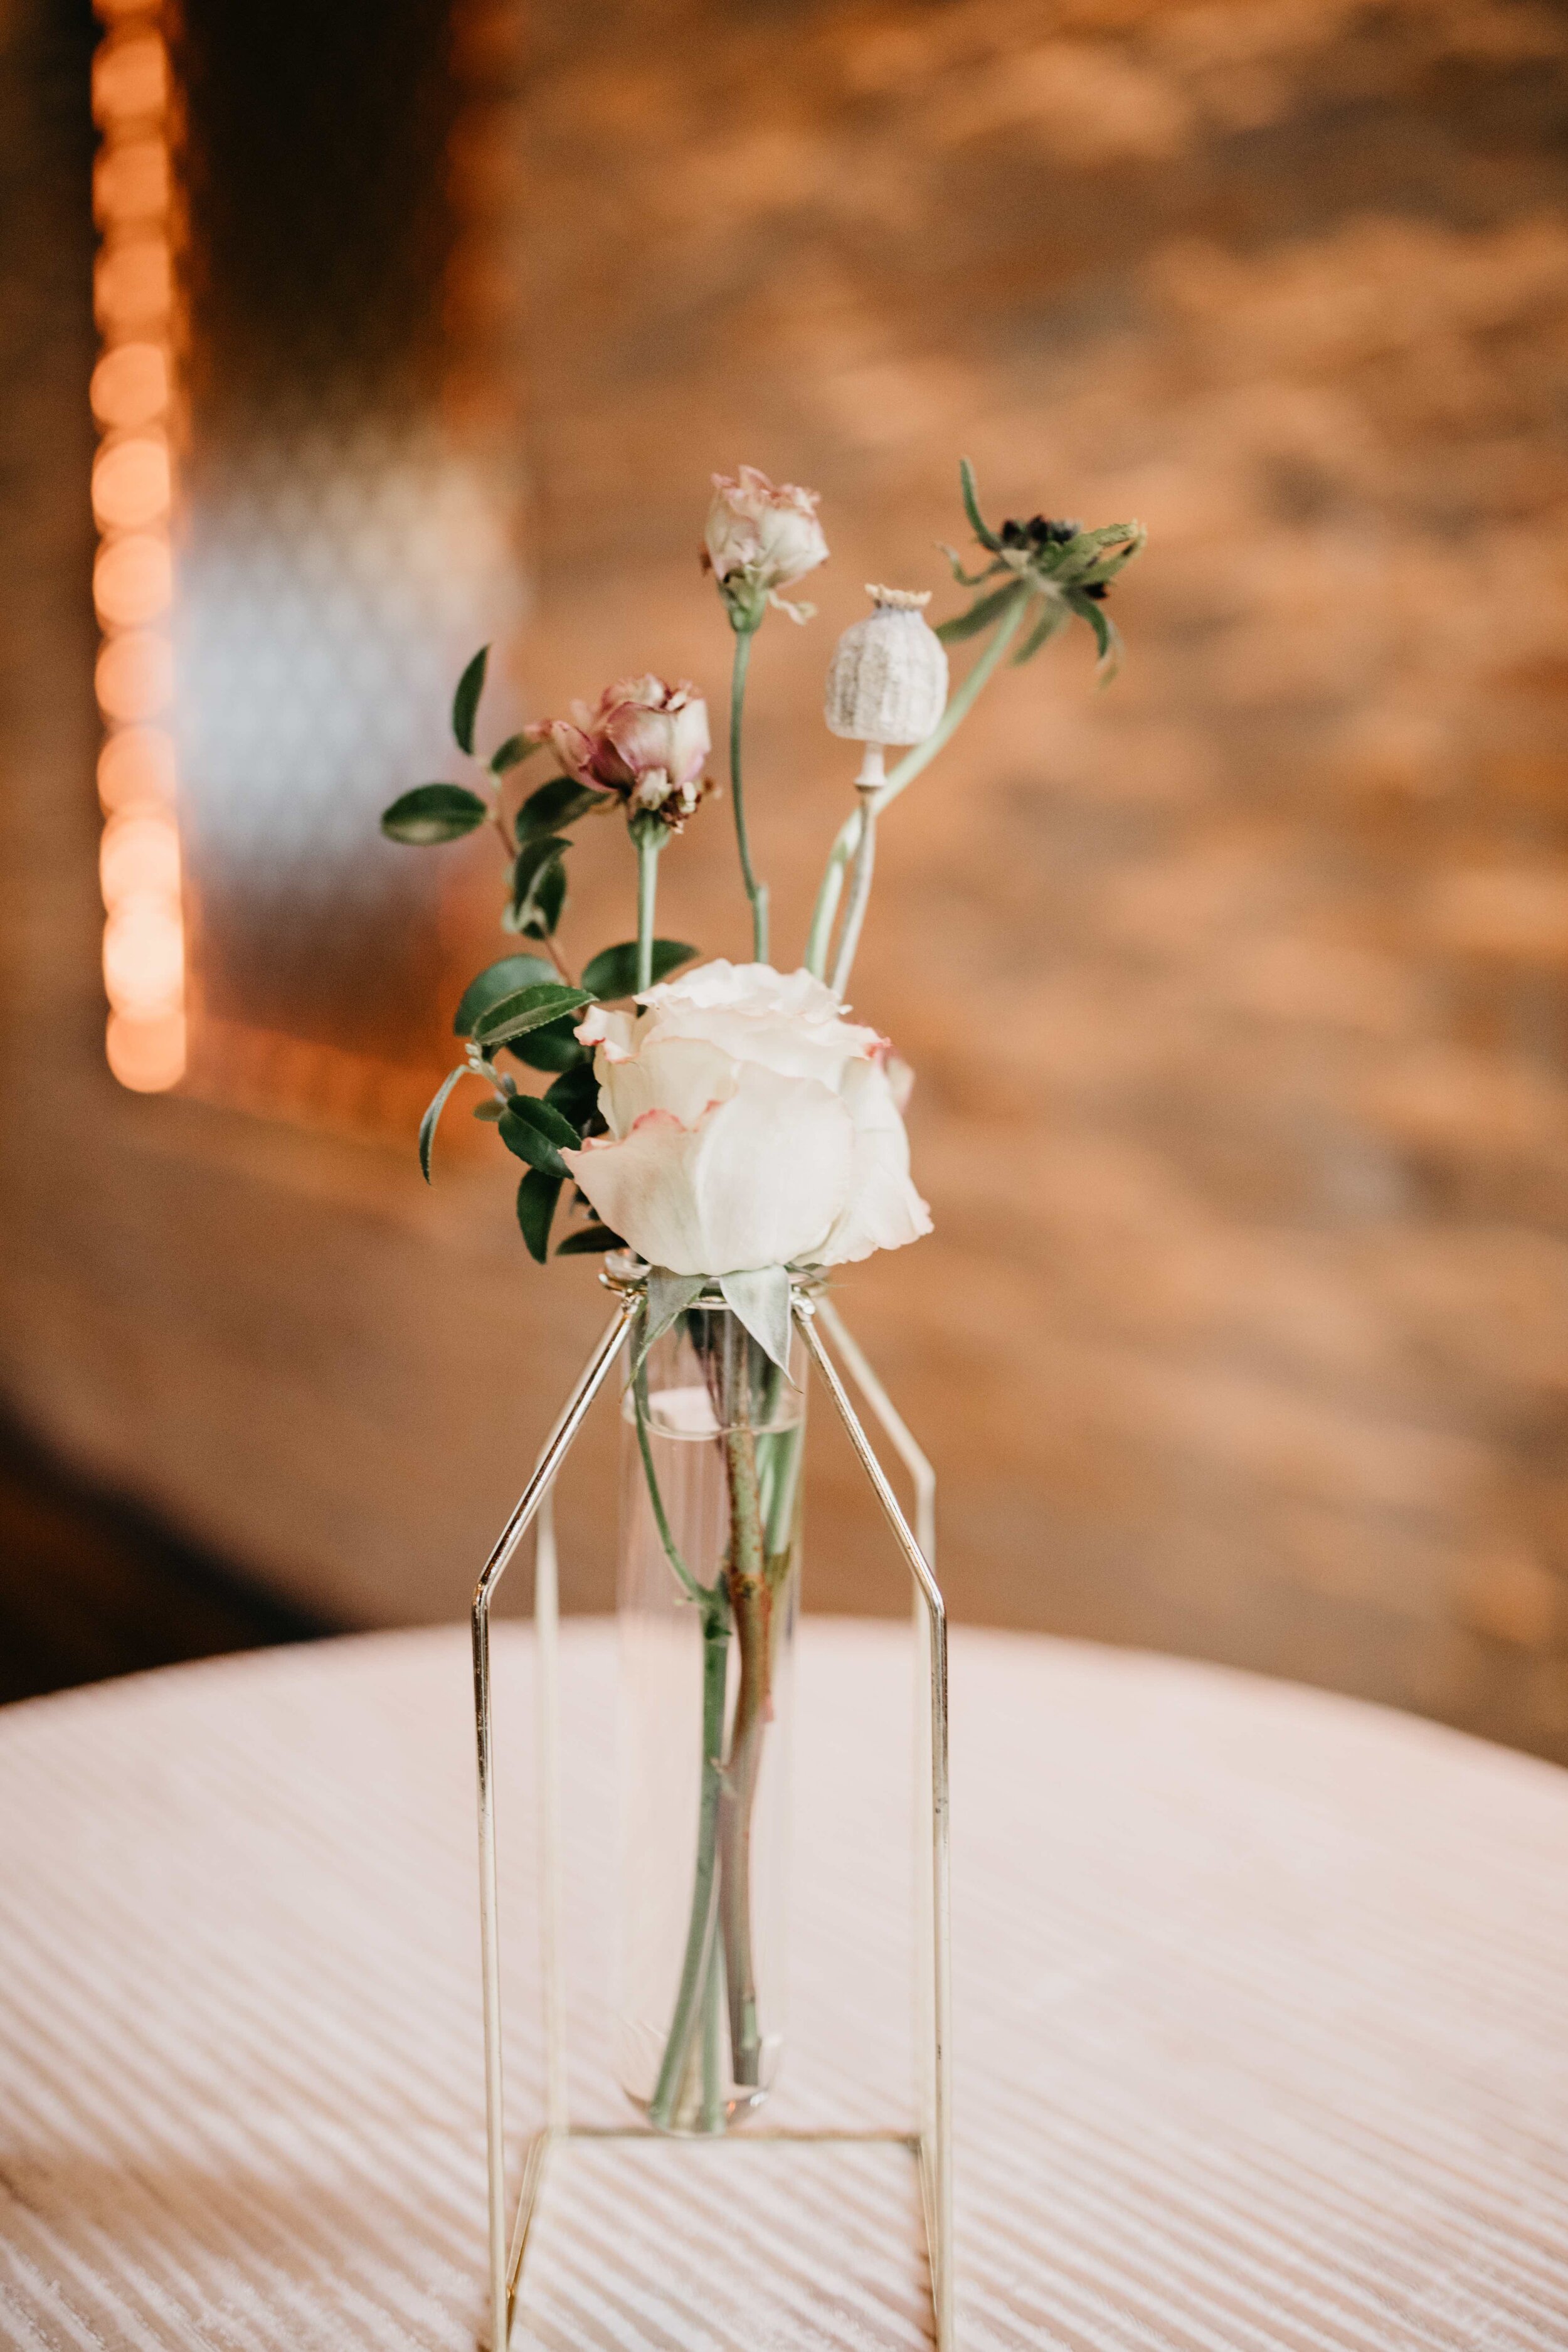 Modern, geometric bud vase with fall florals and dried elements. Nashville wedding florist, Rosemary & Finch, at Clementine.